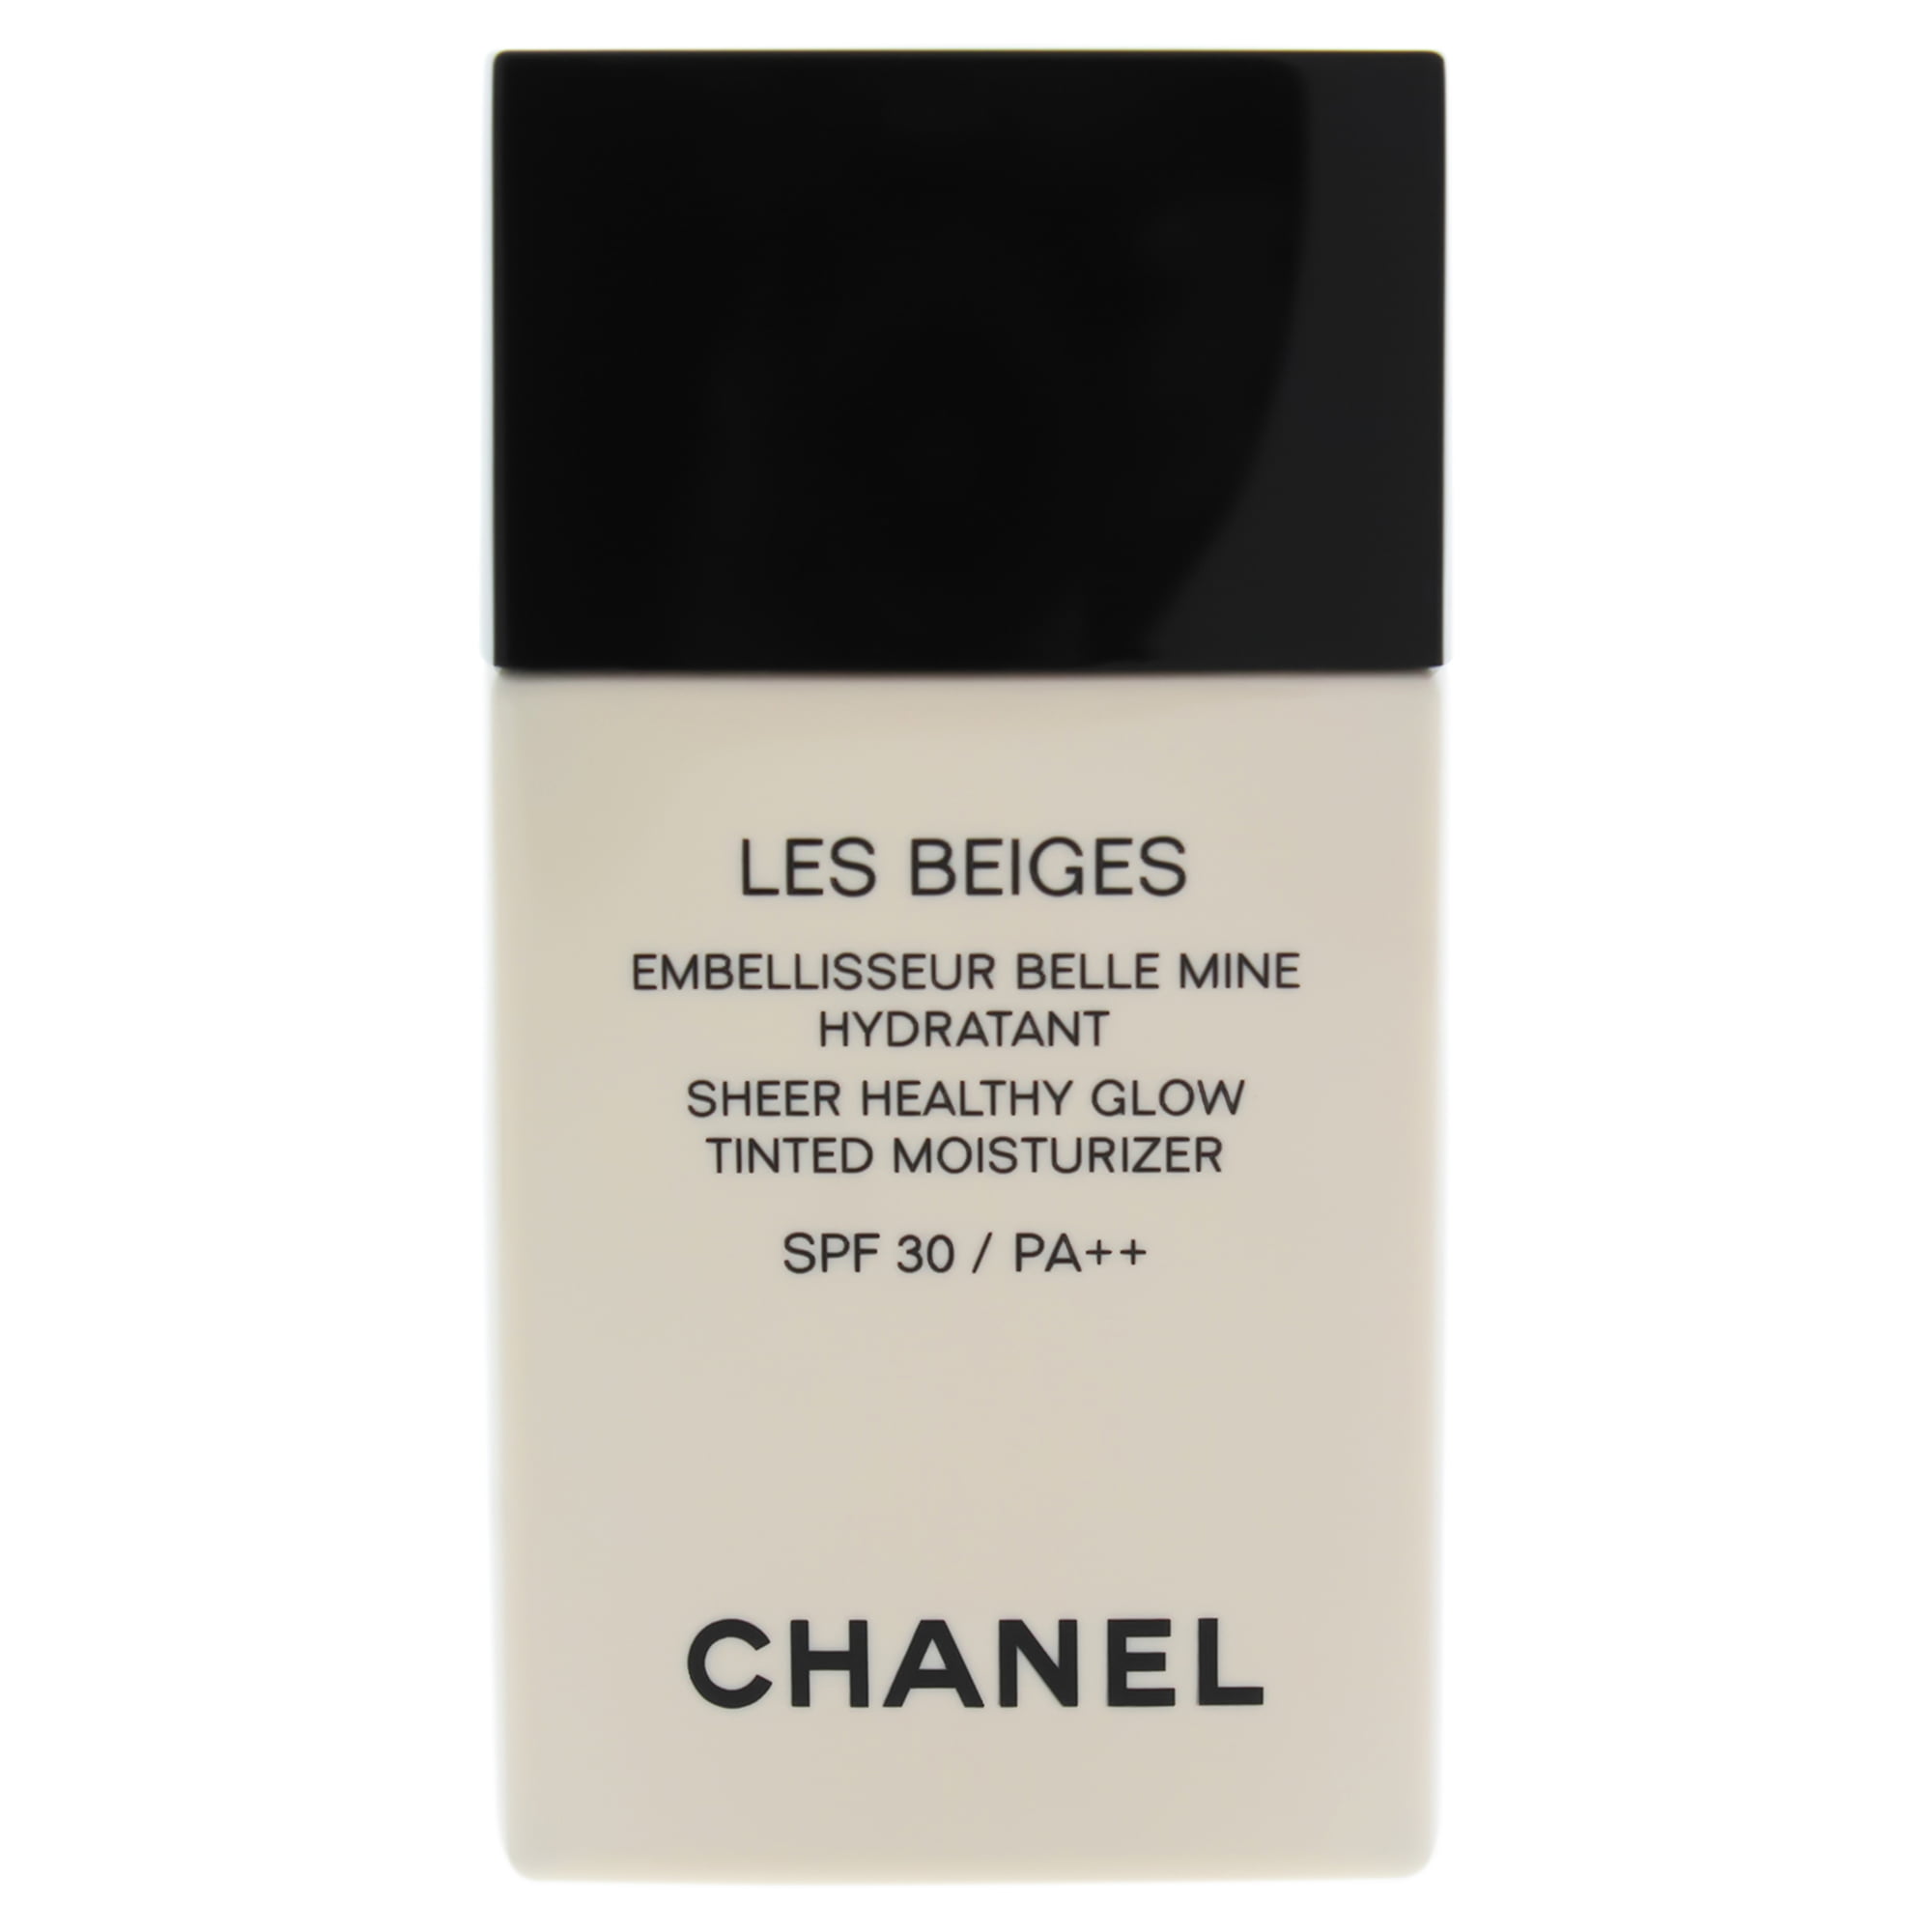 Les Beiges Sheer Healthy Glow Tinted Moisturizing SPF 30 - Light